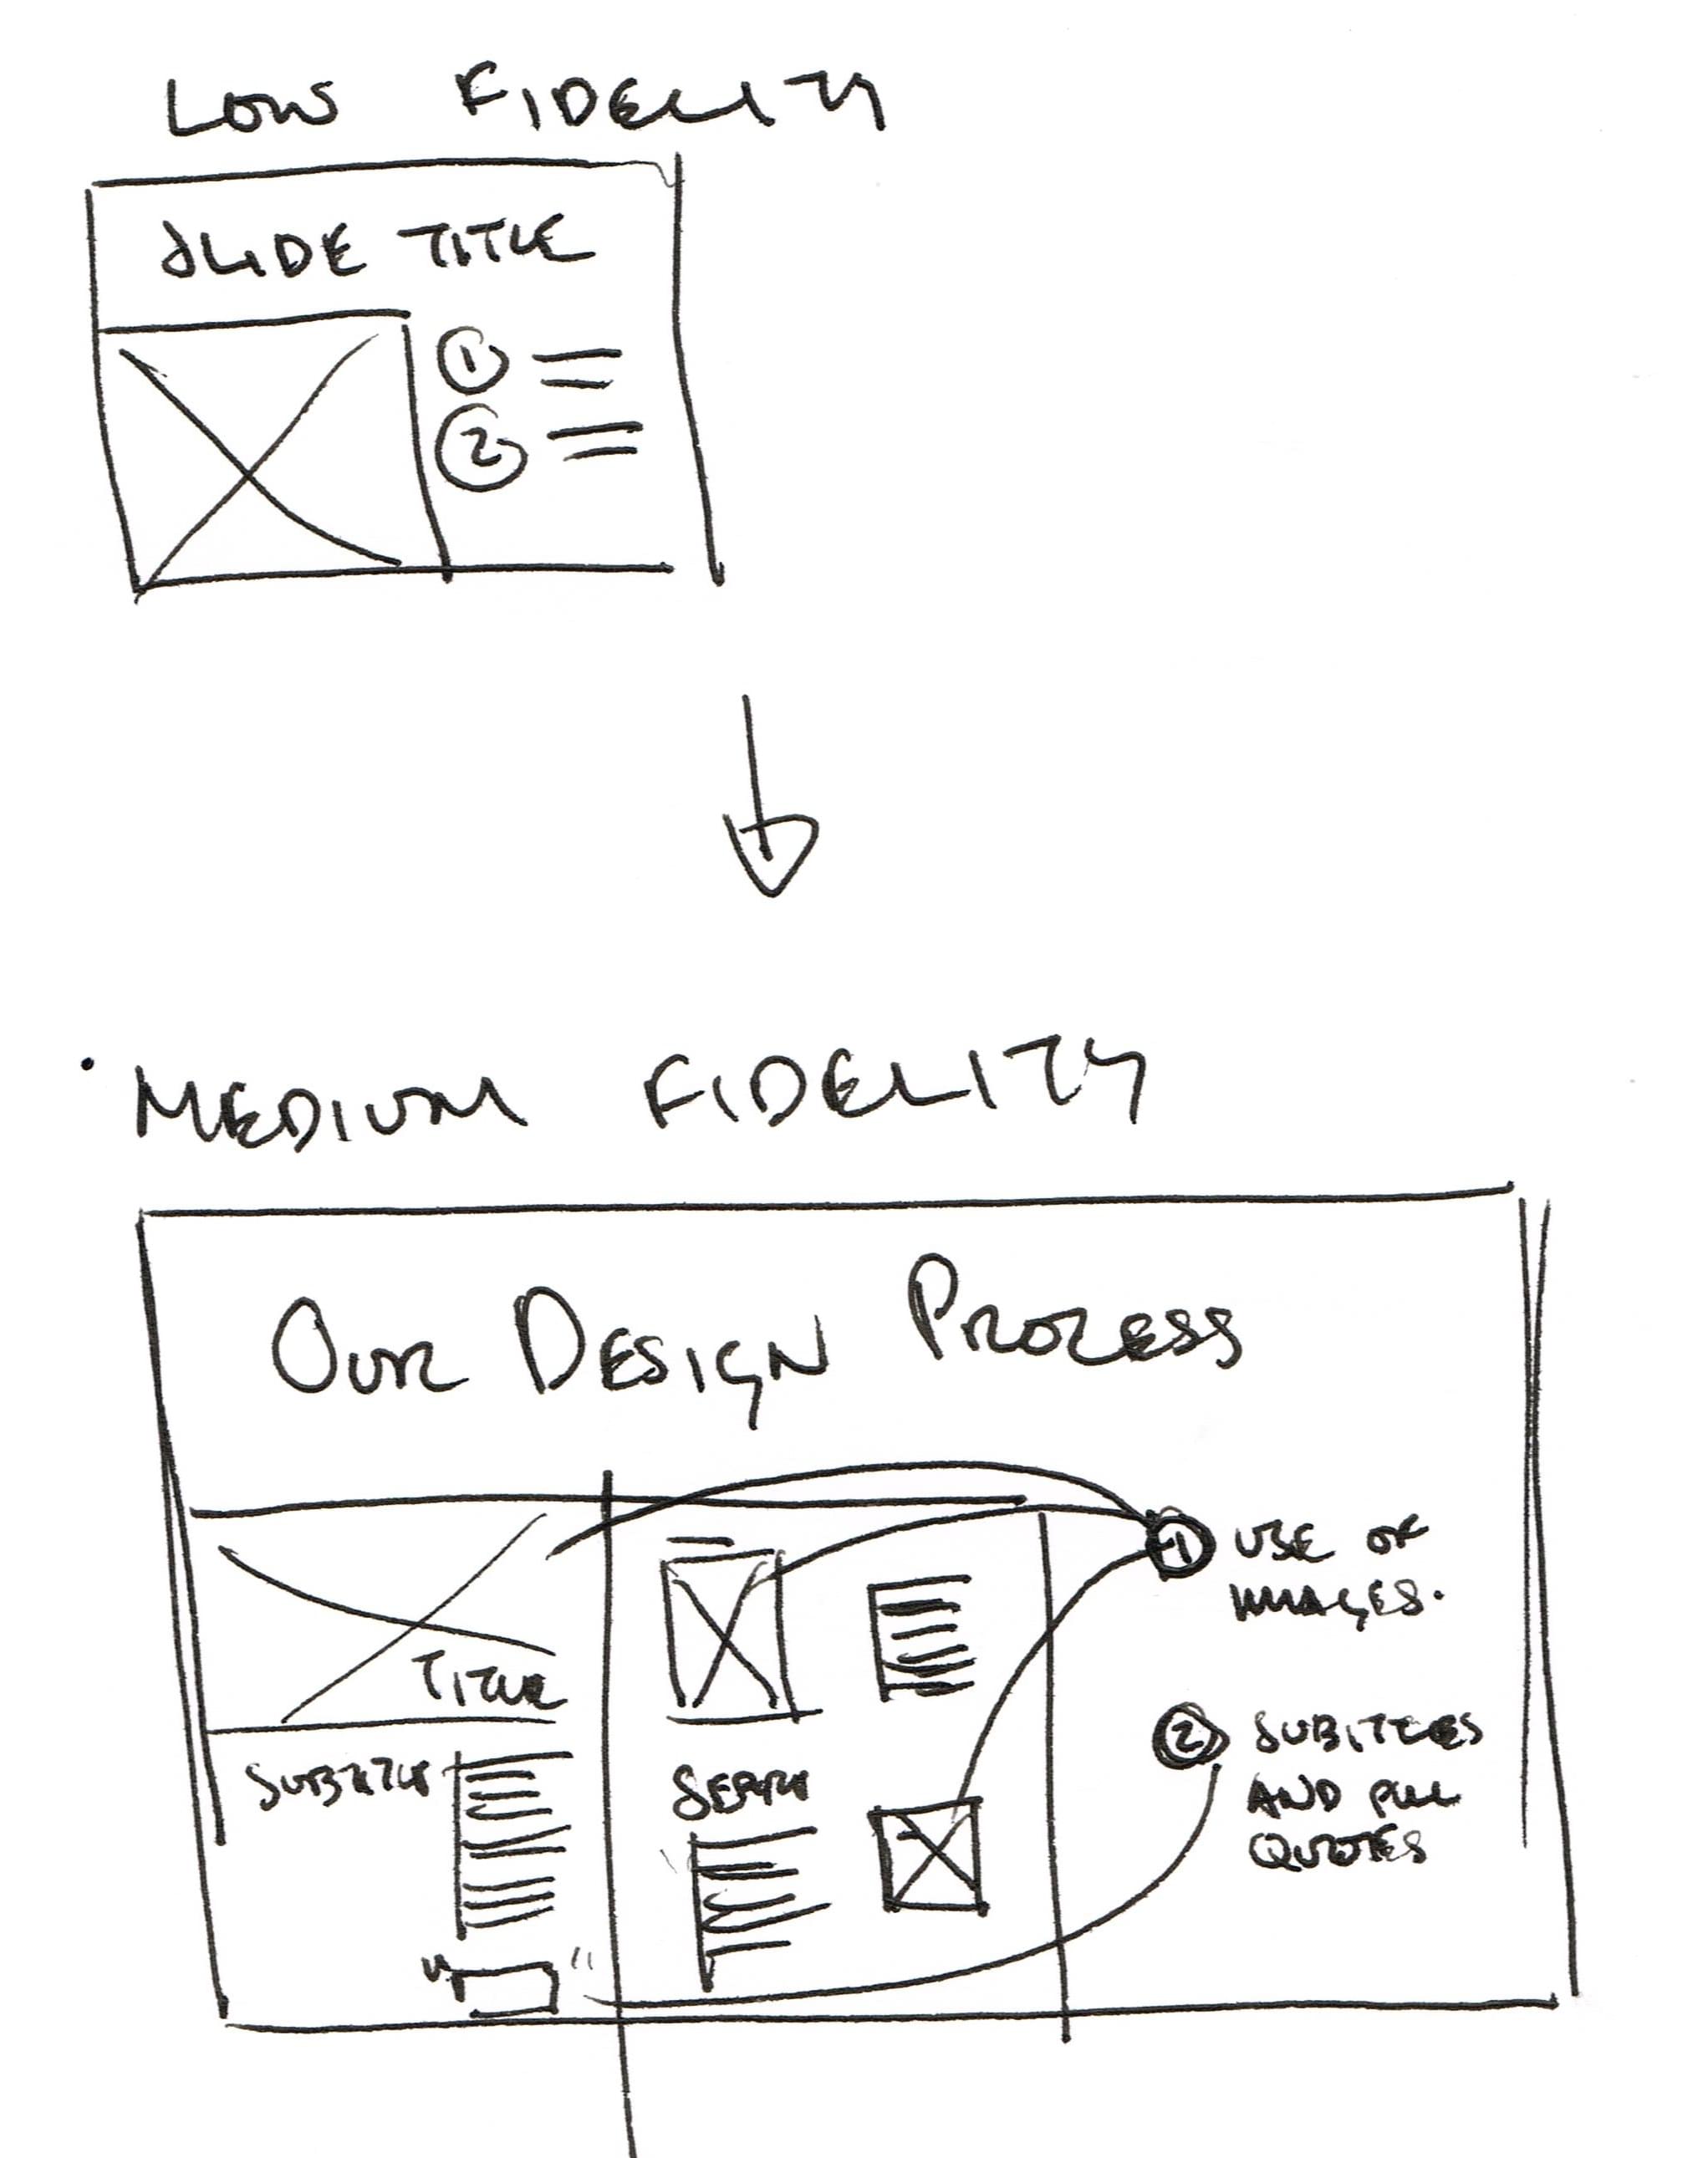 A sketch showing the transition from a low-fidelity to medium-fidelity sketch of a presentation slide